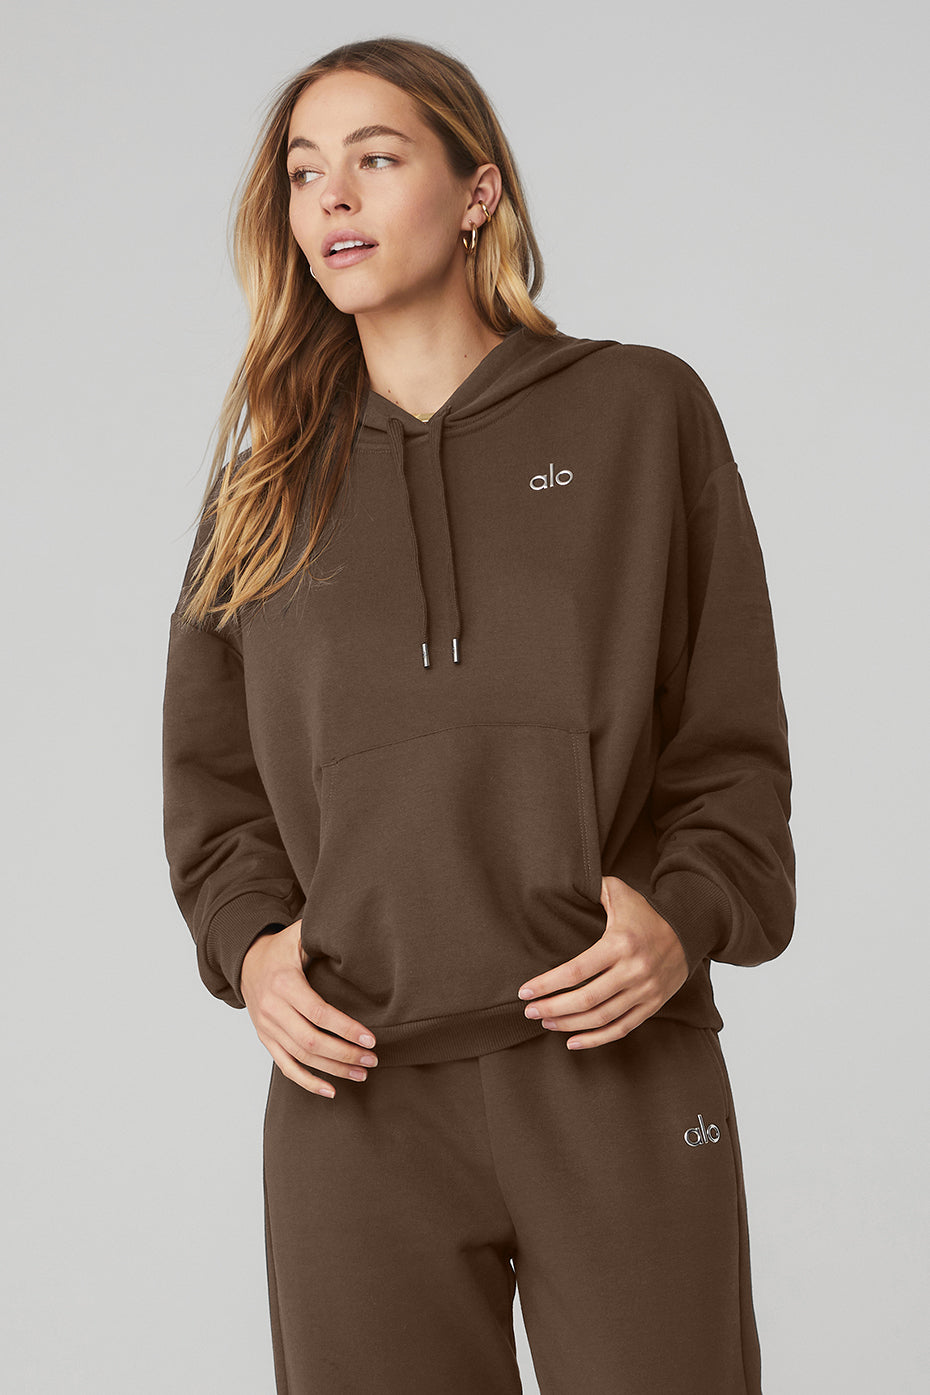 Accolade Hoodie in Espresso by Alo Yoga - Work Well Daily